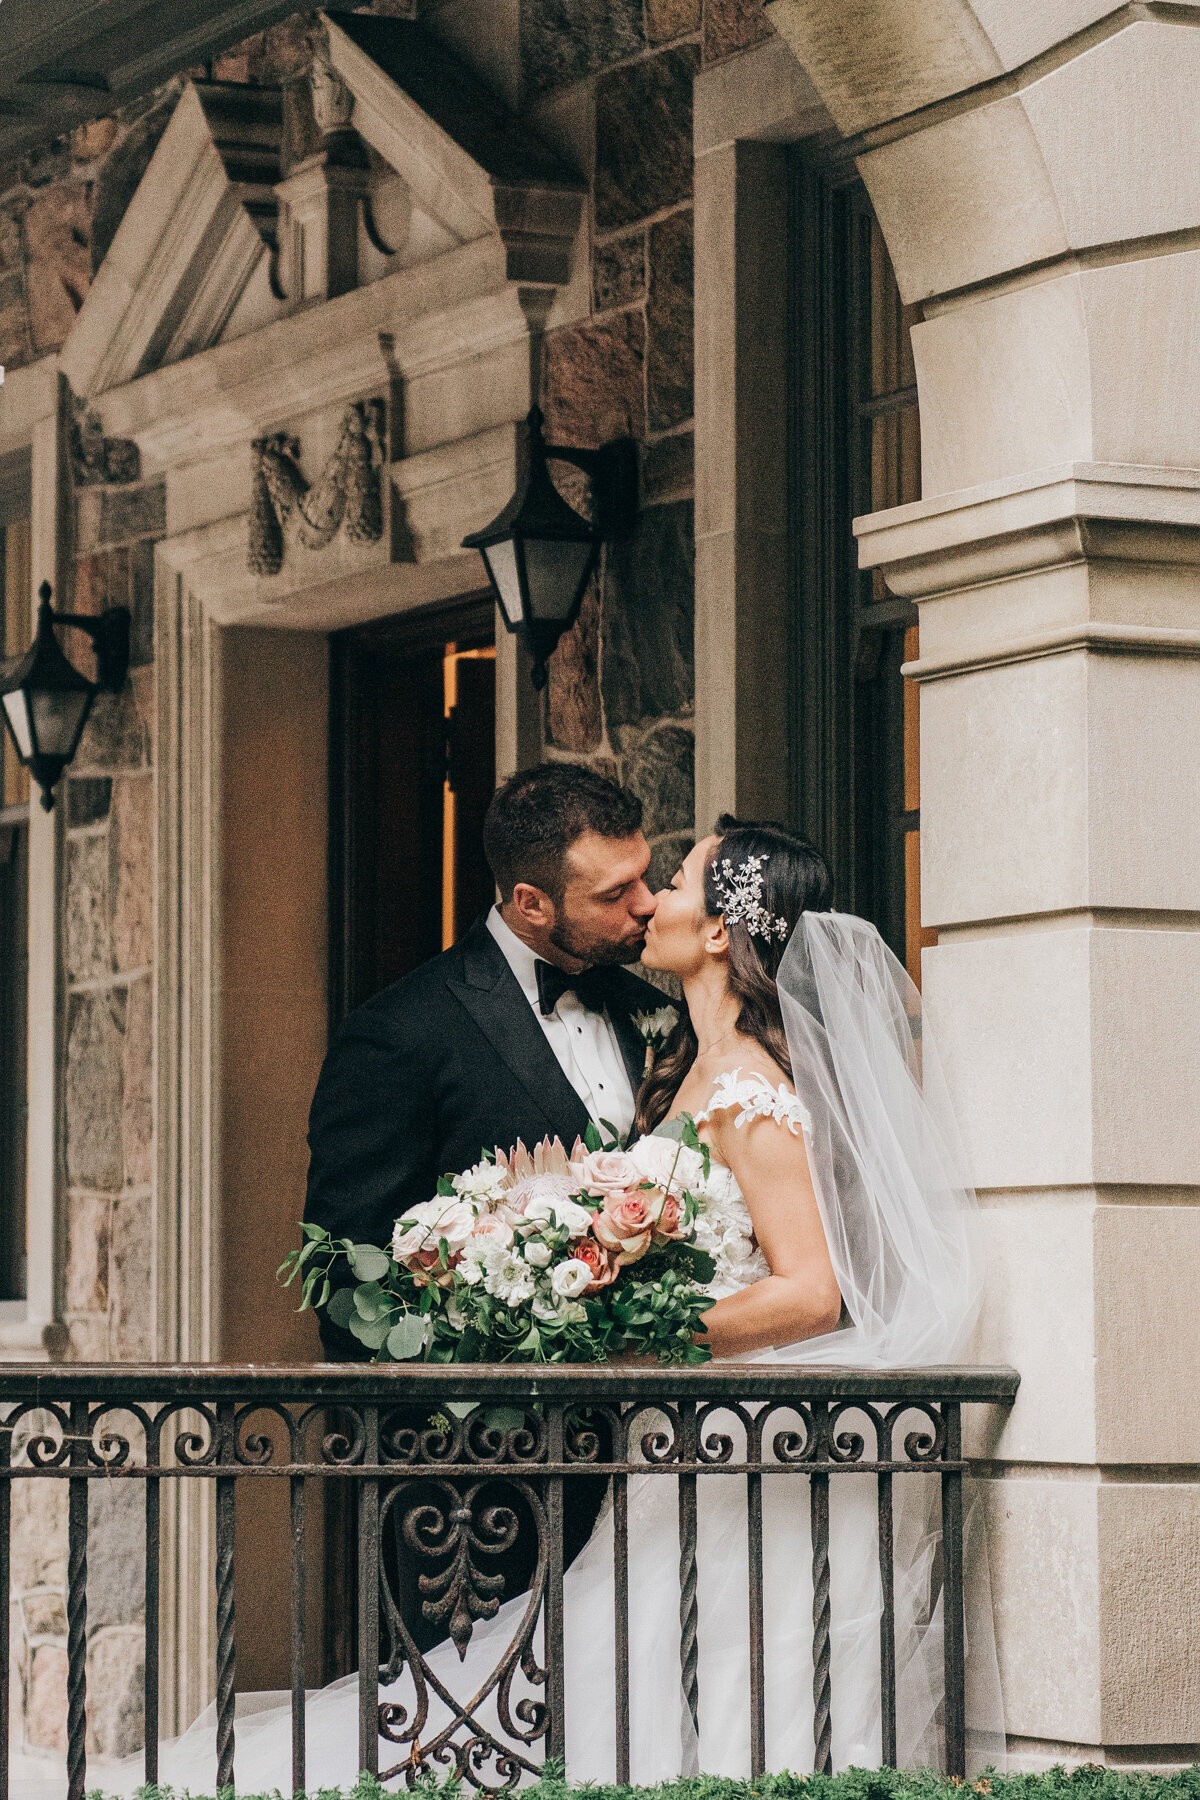 Bride and groom kiss on balcony holding gorgeous bouquet of white and pink florals